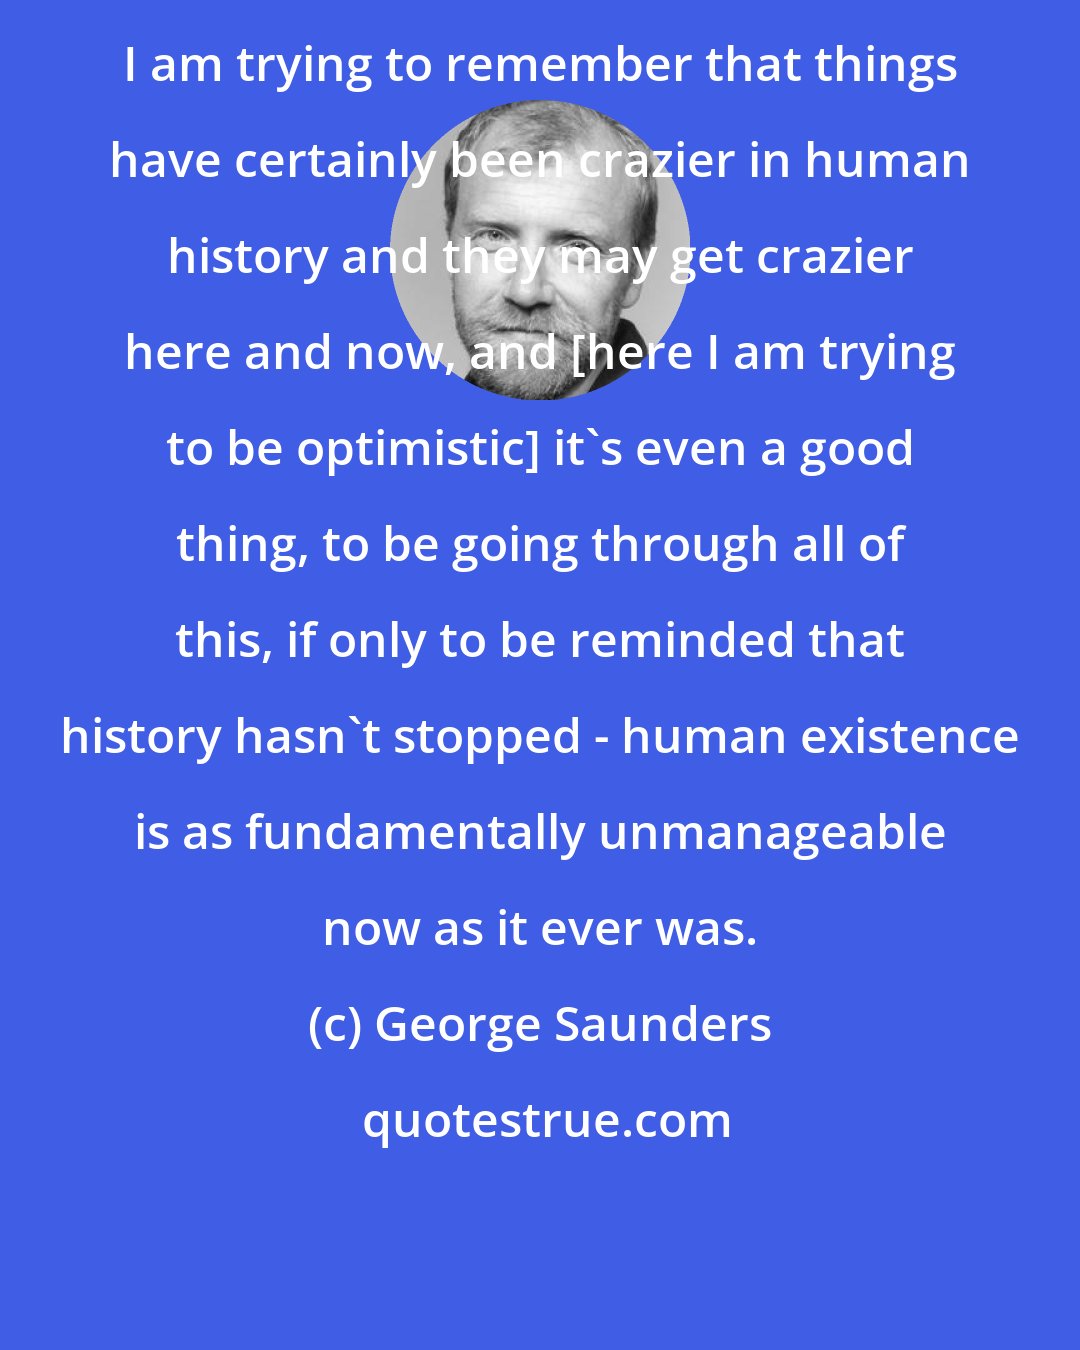 George Saunders: I am trying to remember that things have certainly been crazier in human history and they may get crazier here and now, and [here I am trying to be optimistic] it's even a good thing, to be going through all of this, if only to be reminded that history hasn't stopped - human existence is as fundamentally unmanageable now as it ever was.